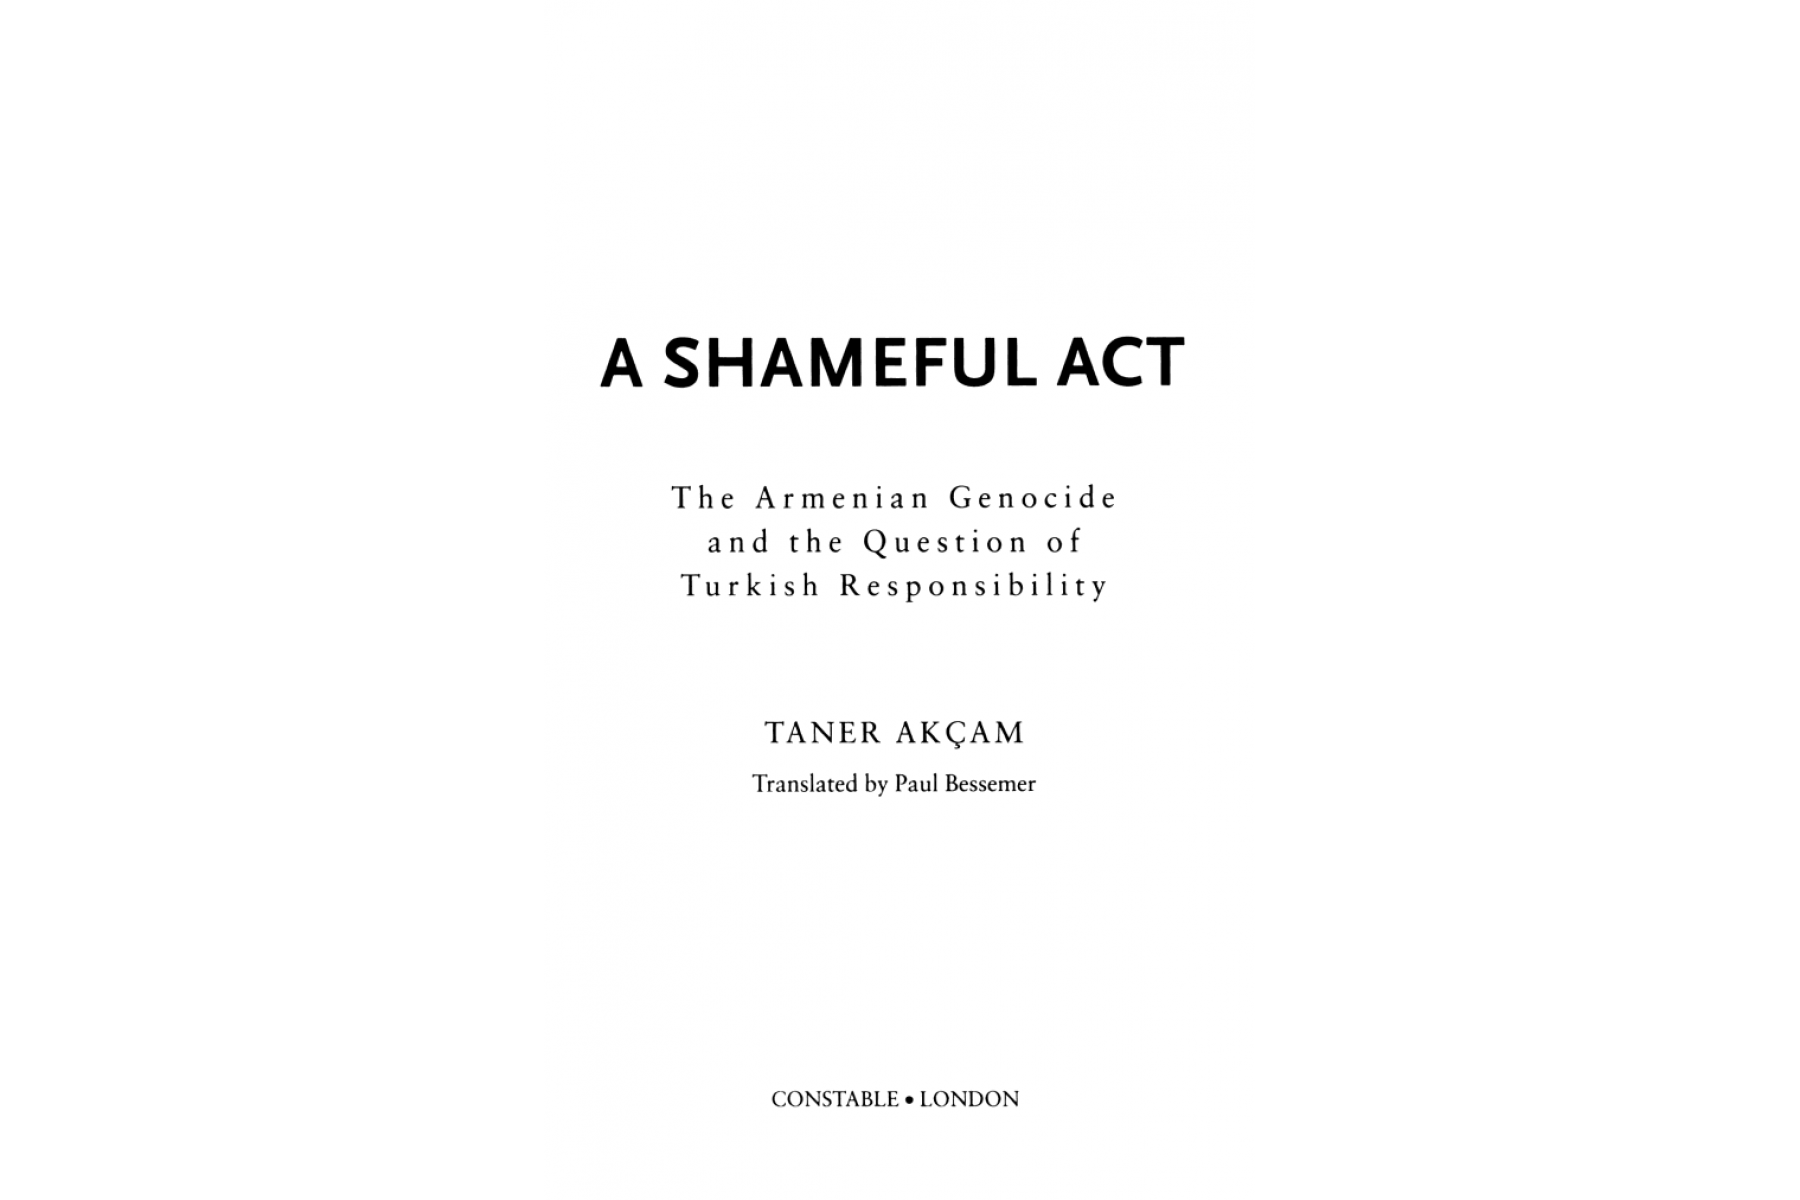 A Shameful Act: The Armenian Genocide and the Question of Turkish Responsibility